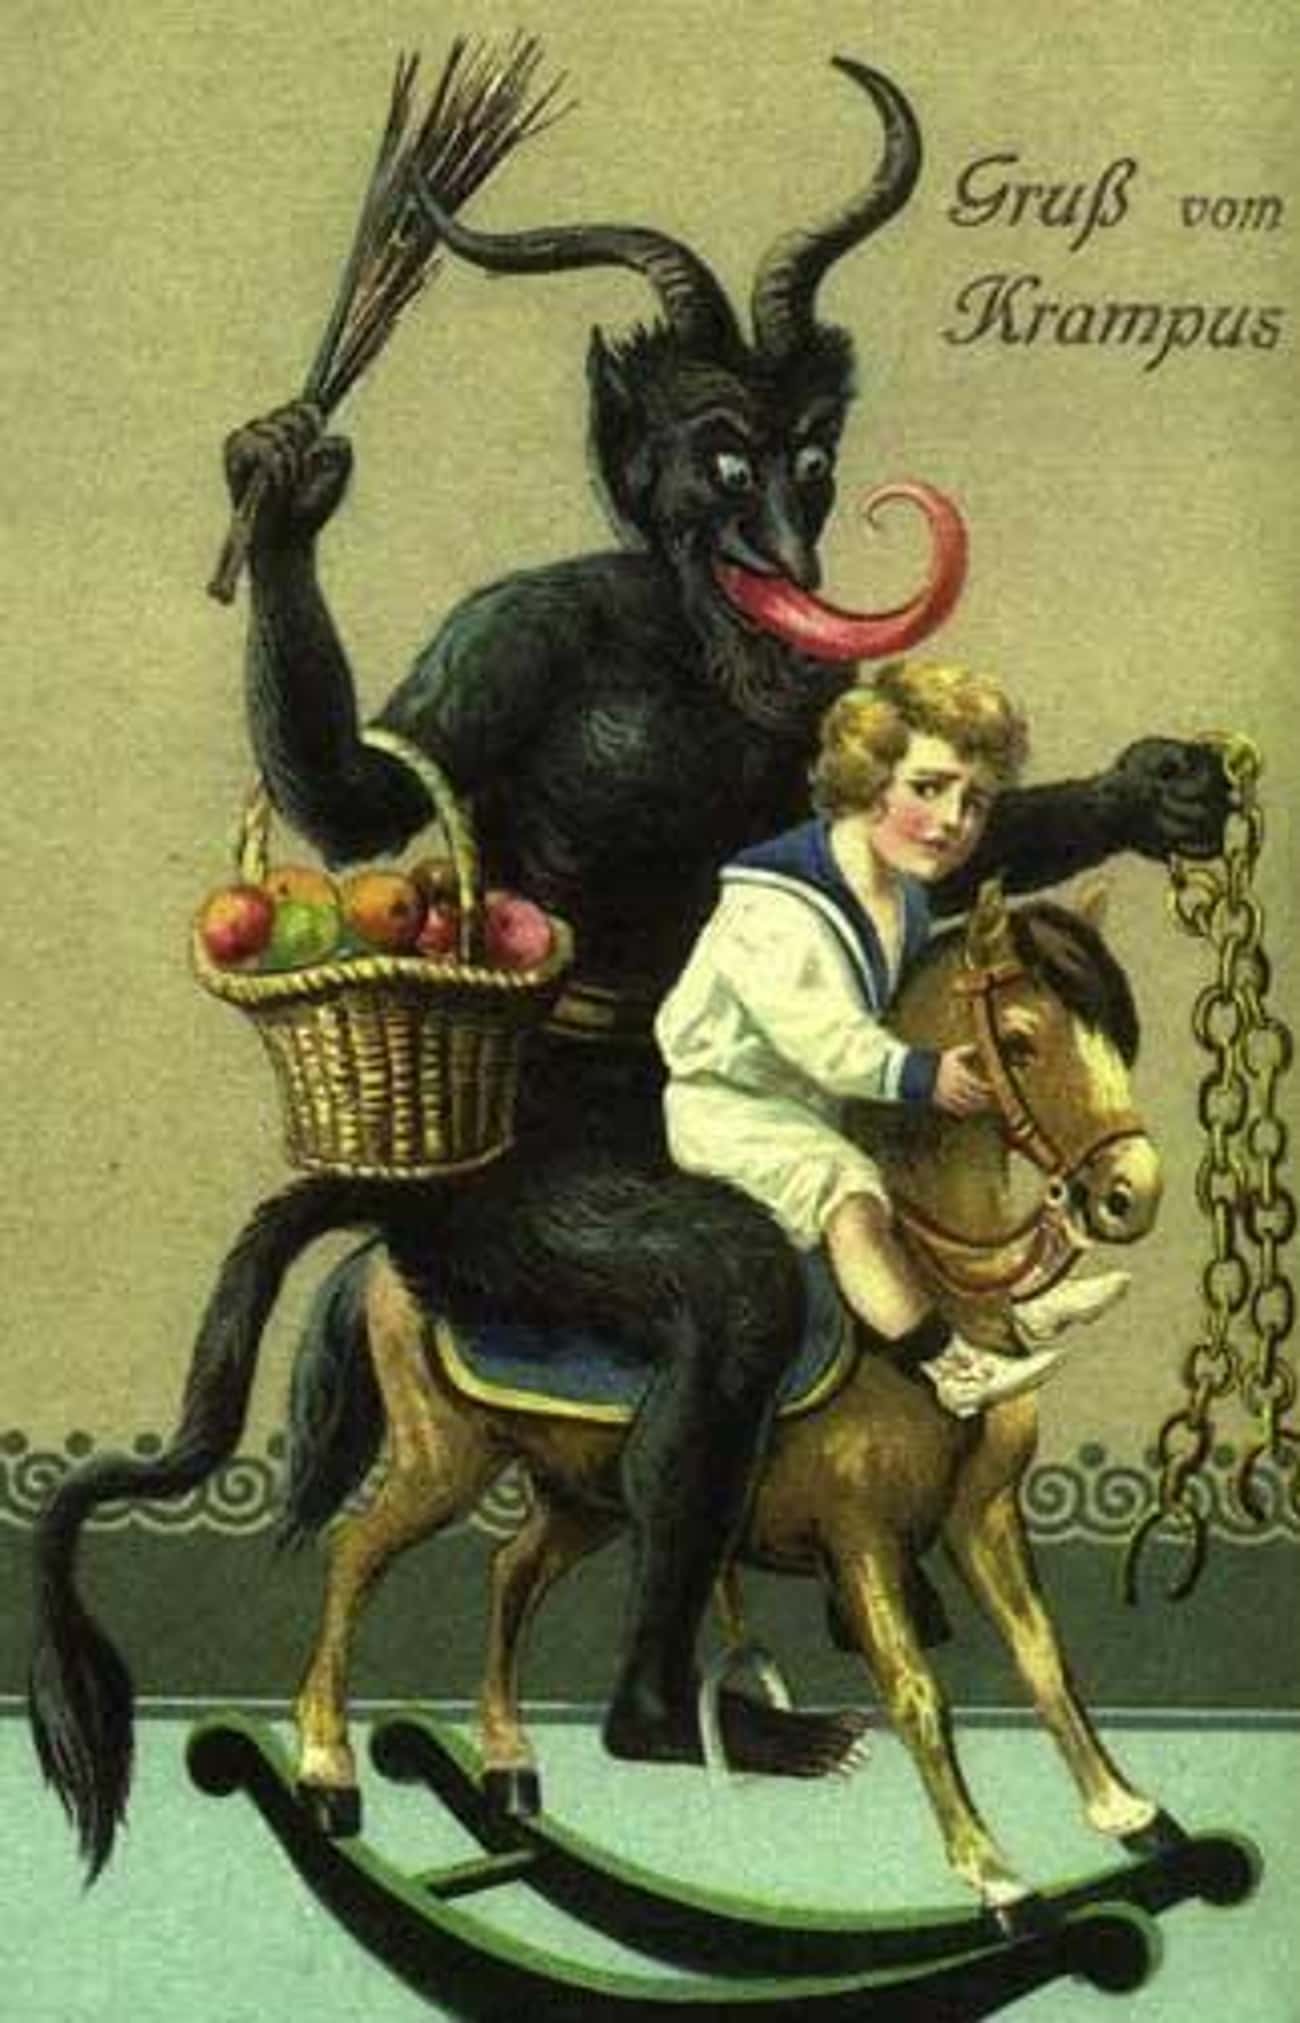 Don’t Get Too Comfortable With Your Toys - Krampus Might Be Right Behind You